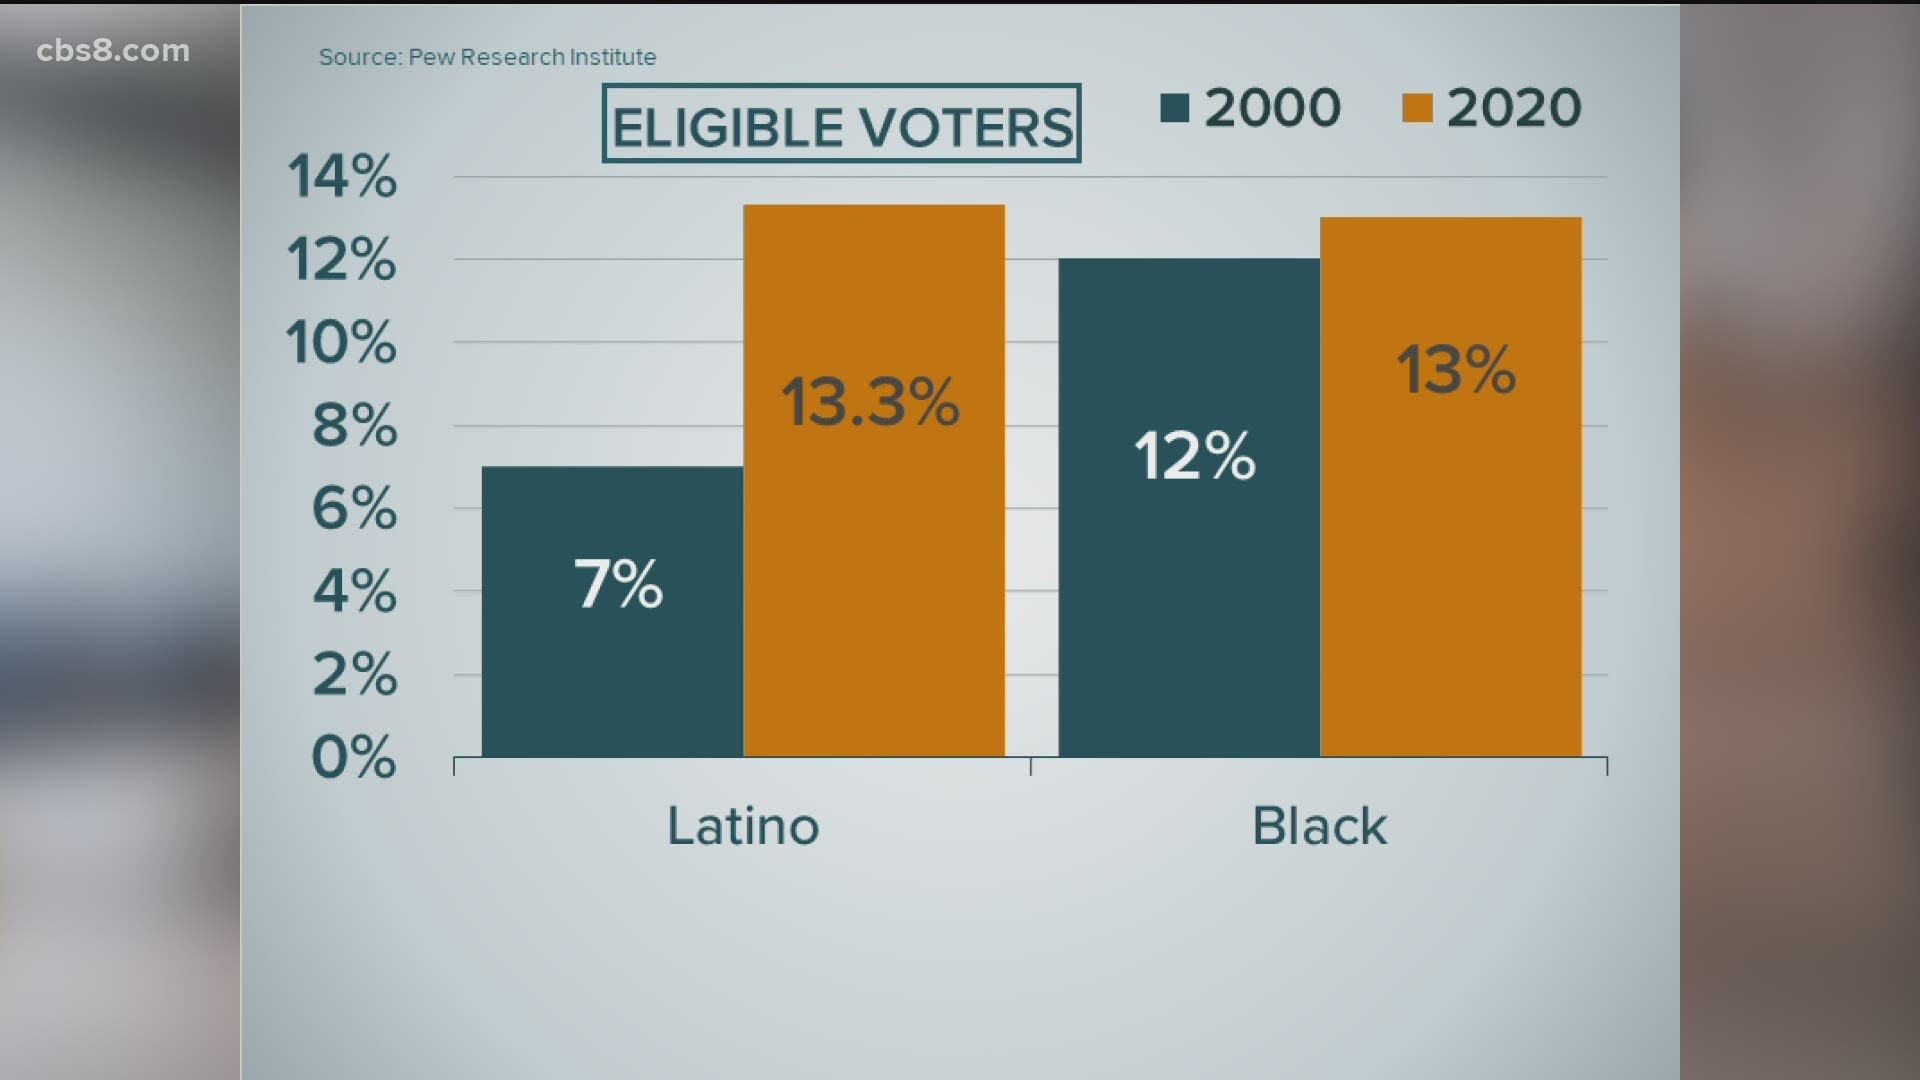 The percentage of Latino voters has grown significantly since 2000 when they represented just 7% of voters while Black voters represented 12%.